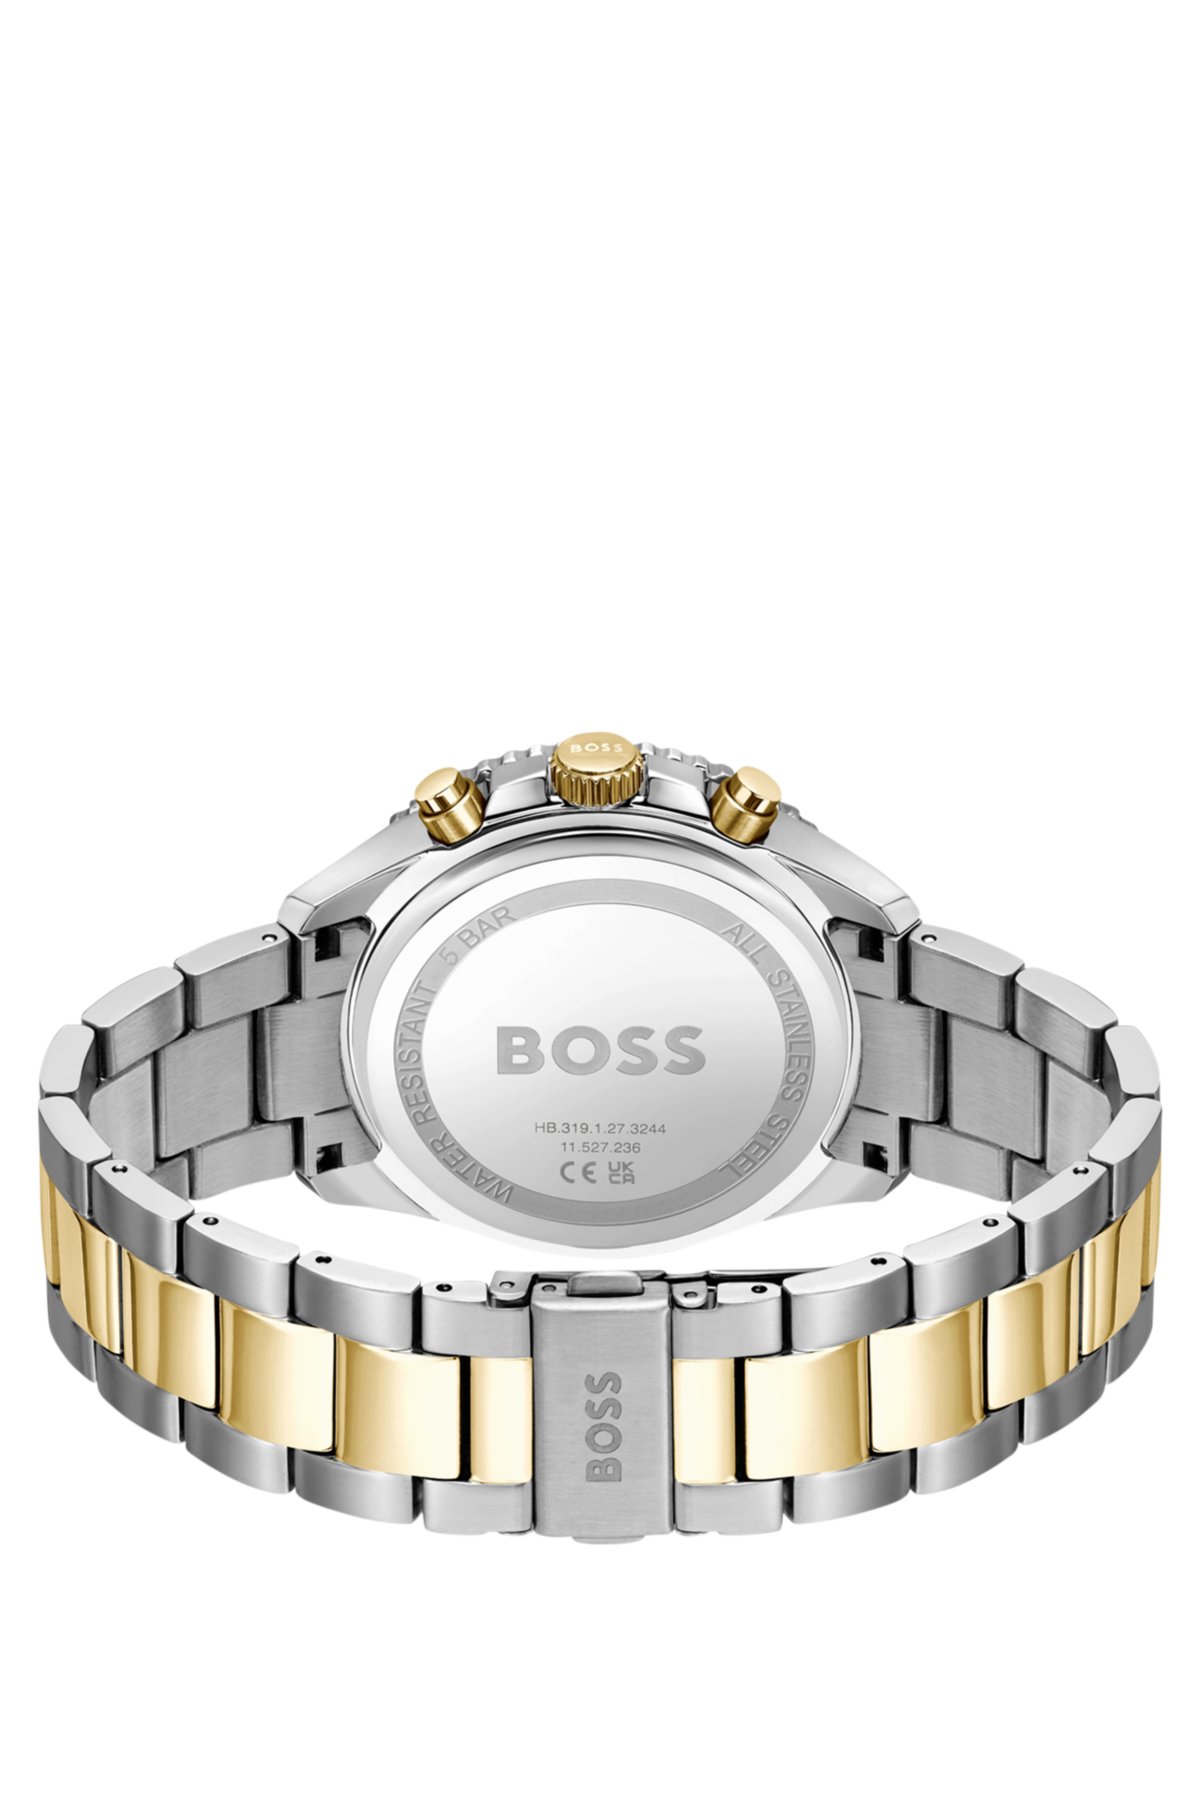 BOSS - Two-tone link-bracelet chronograph watch with grey dial